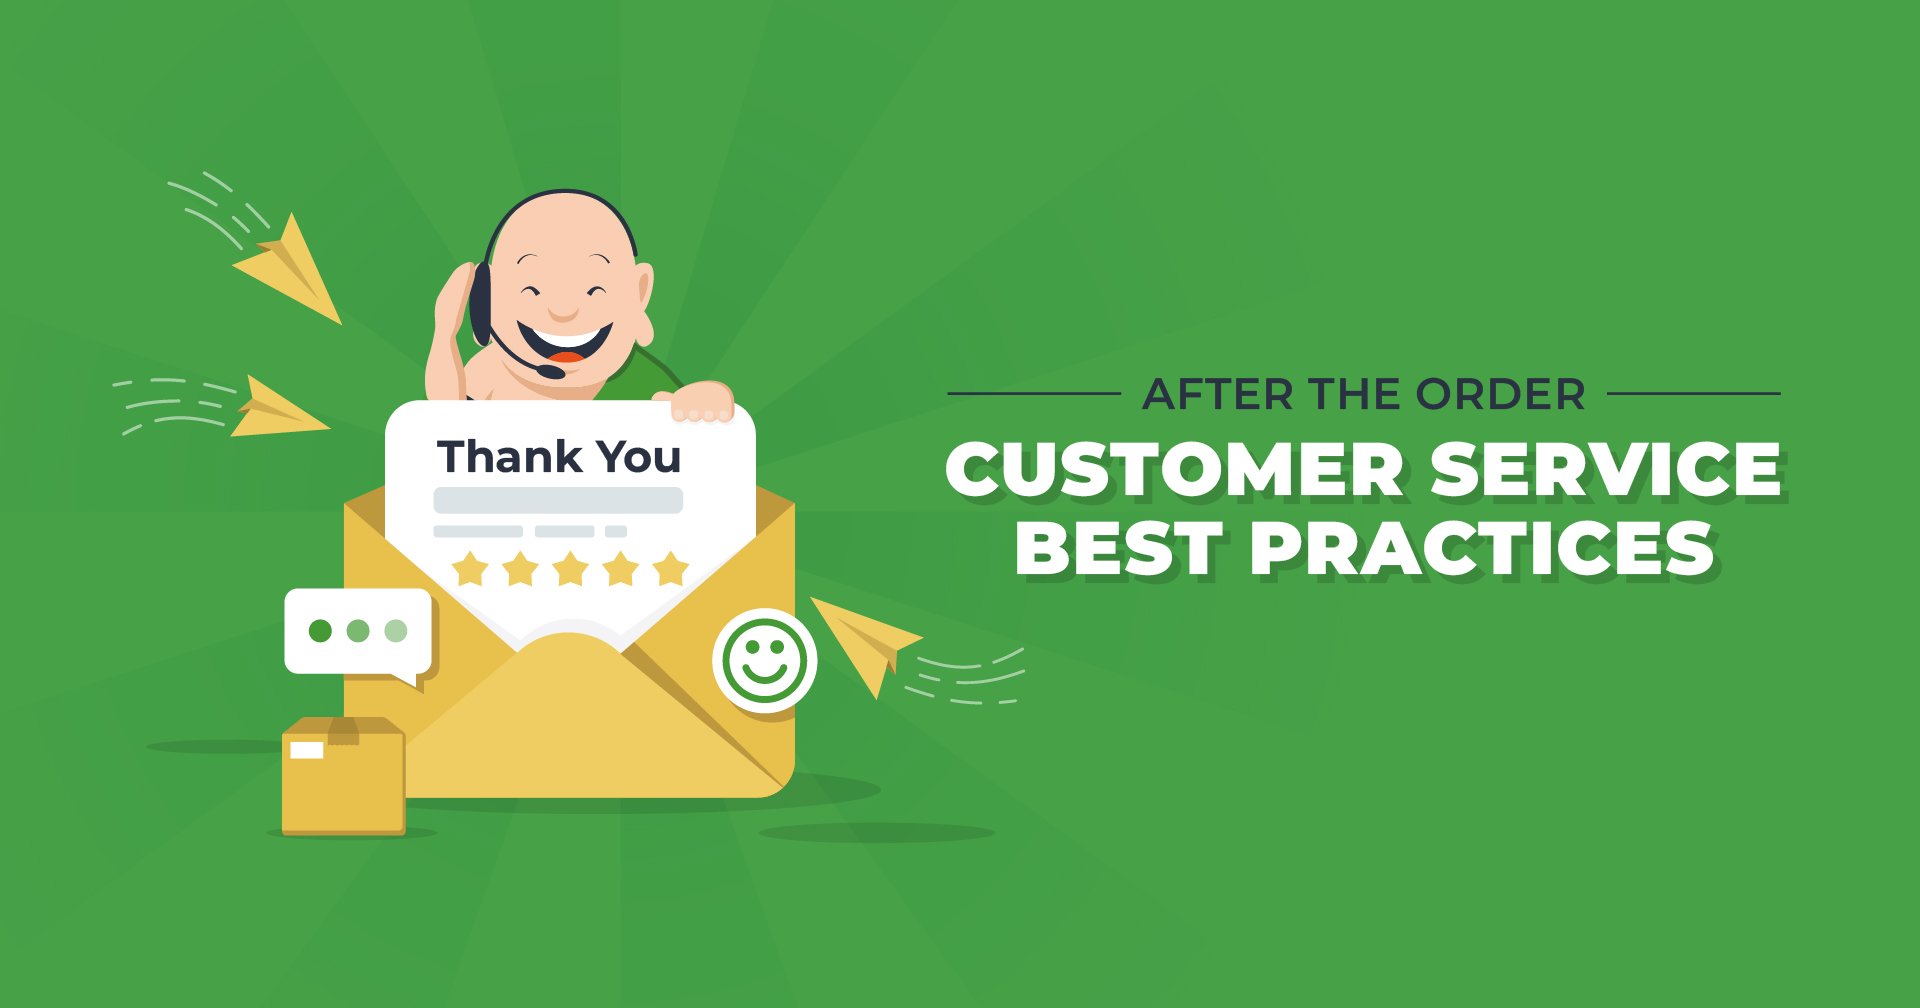 After the Order: Customer Service Best Practices